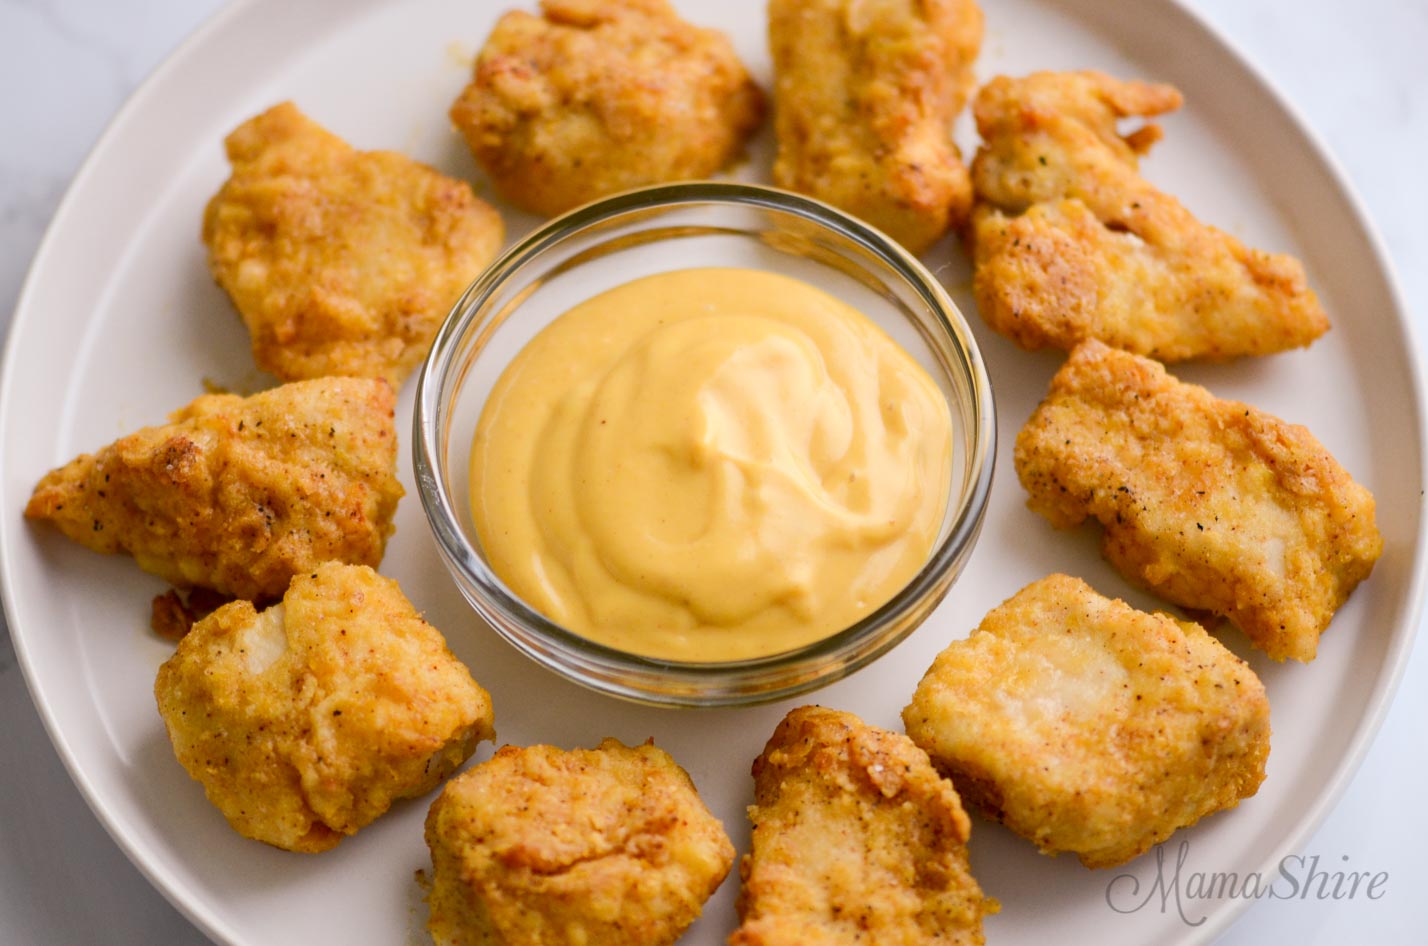 Gluten-free nuggets with copycat Chick Fil A Sauce.